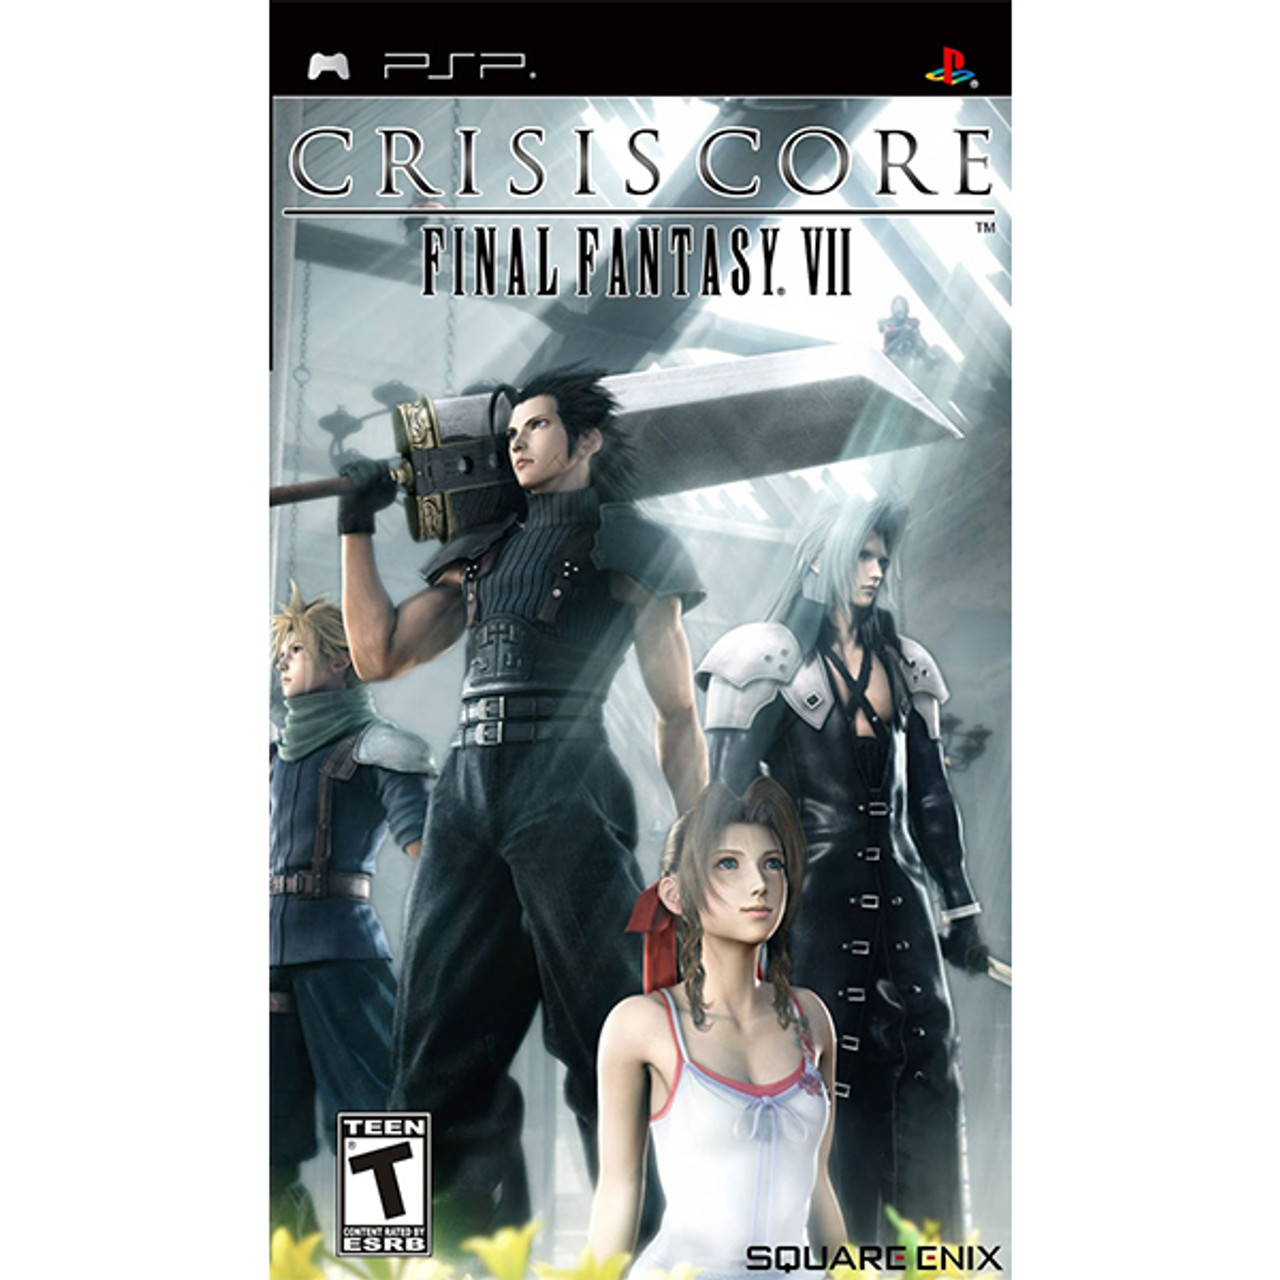 PSP game or not, Crisis Core deserves its remaster; it's become an integral  part of Final Fantasy 7